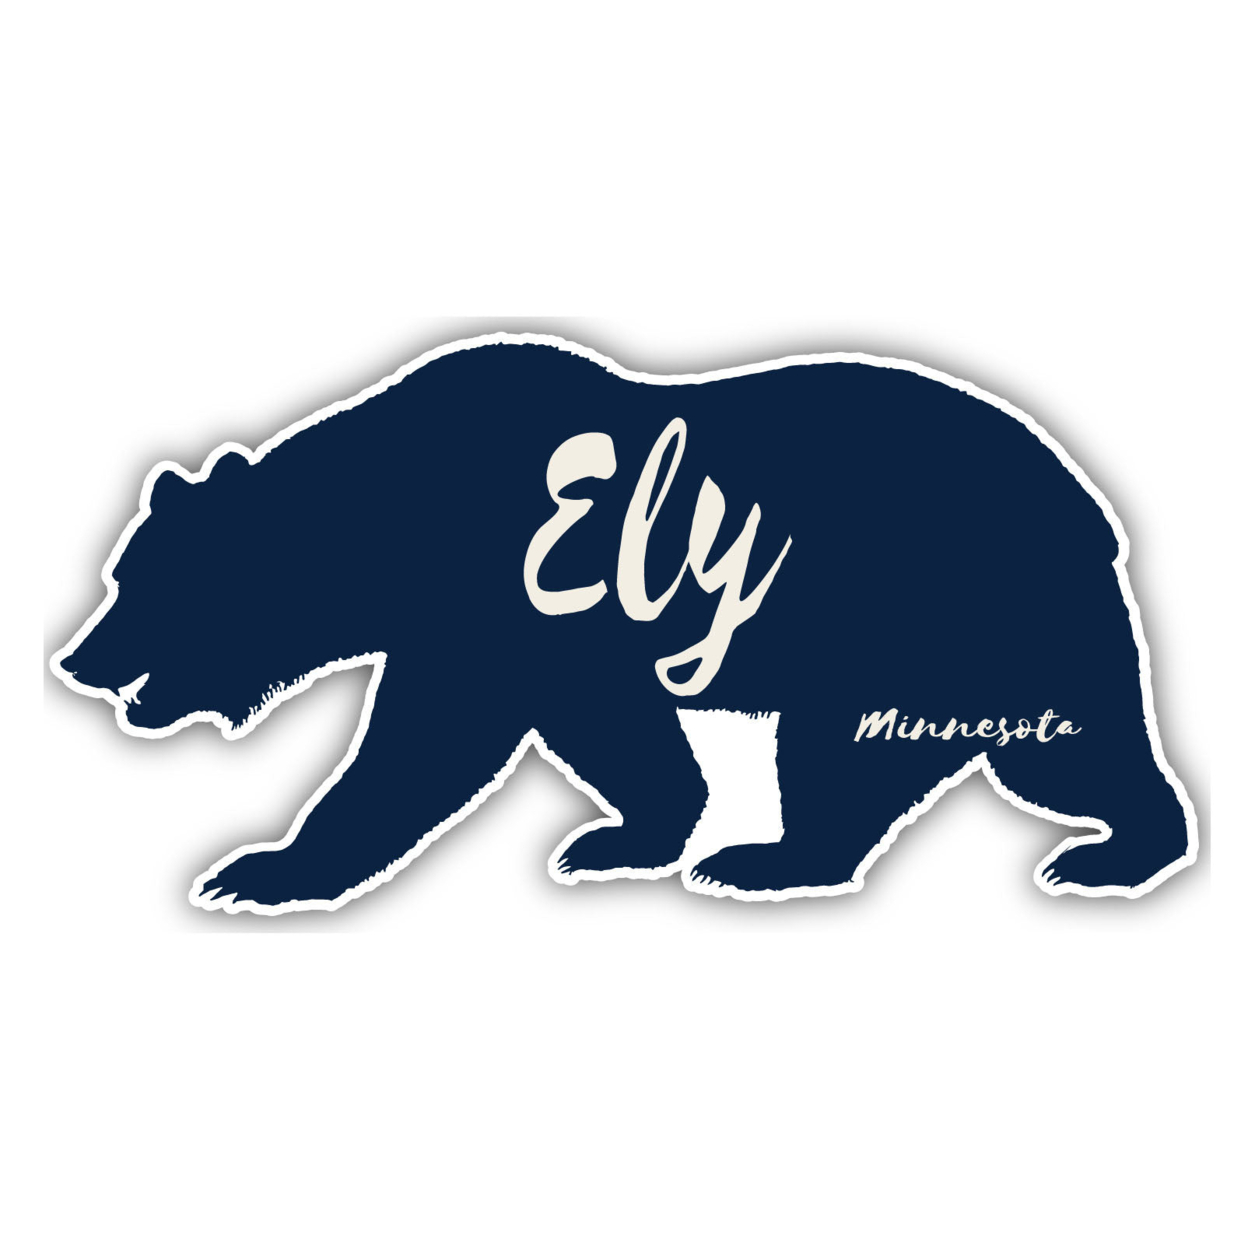 Ely Minnesota Souvenir Decorative Stickers (Choose Theme And Size) - 4-Pack, 4-Inch, Bear